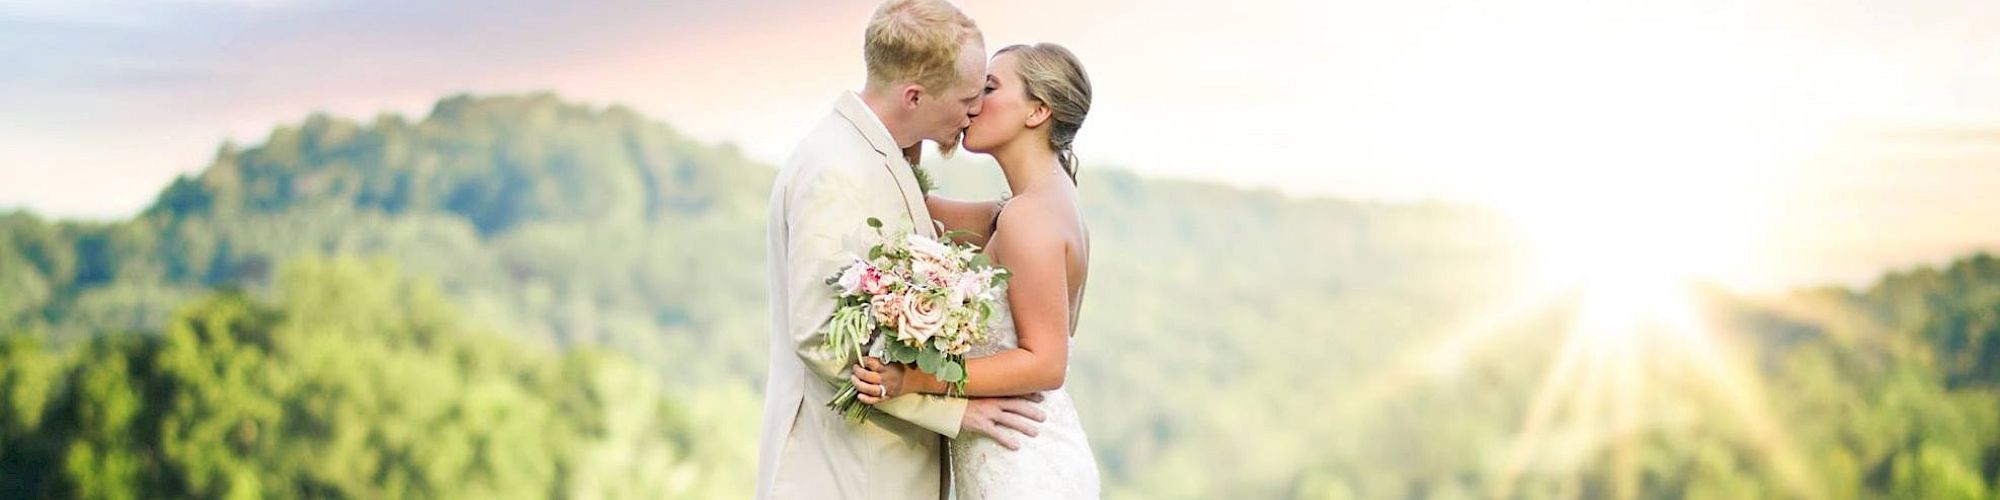 A couple kisses outdoors during their wedding, with the sun setting behind them over a scenic forest and lake.